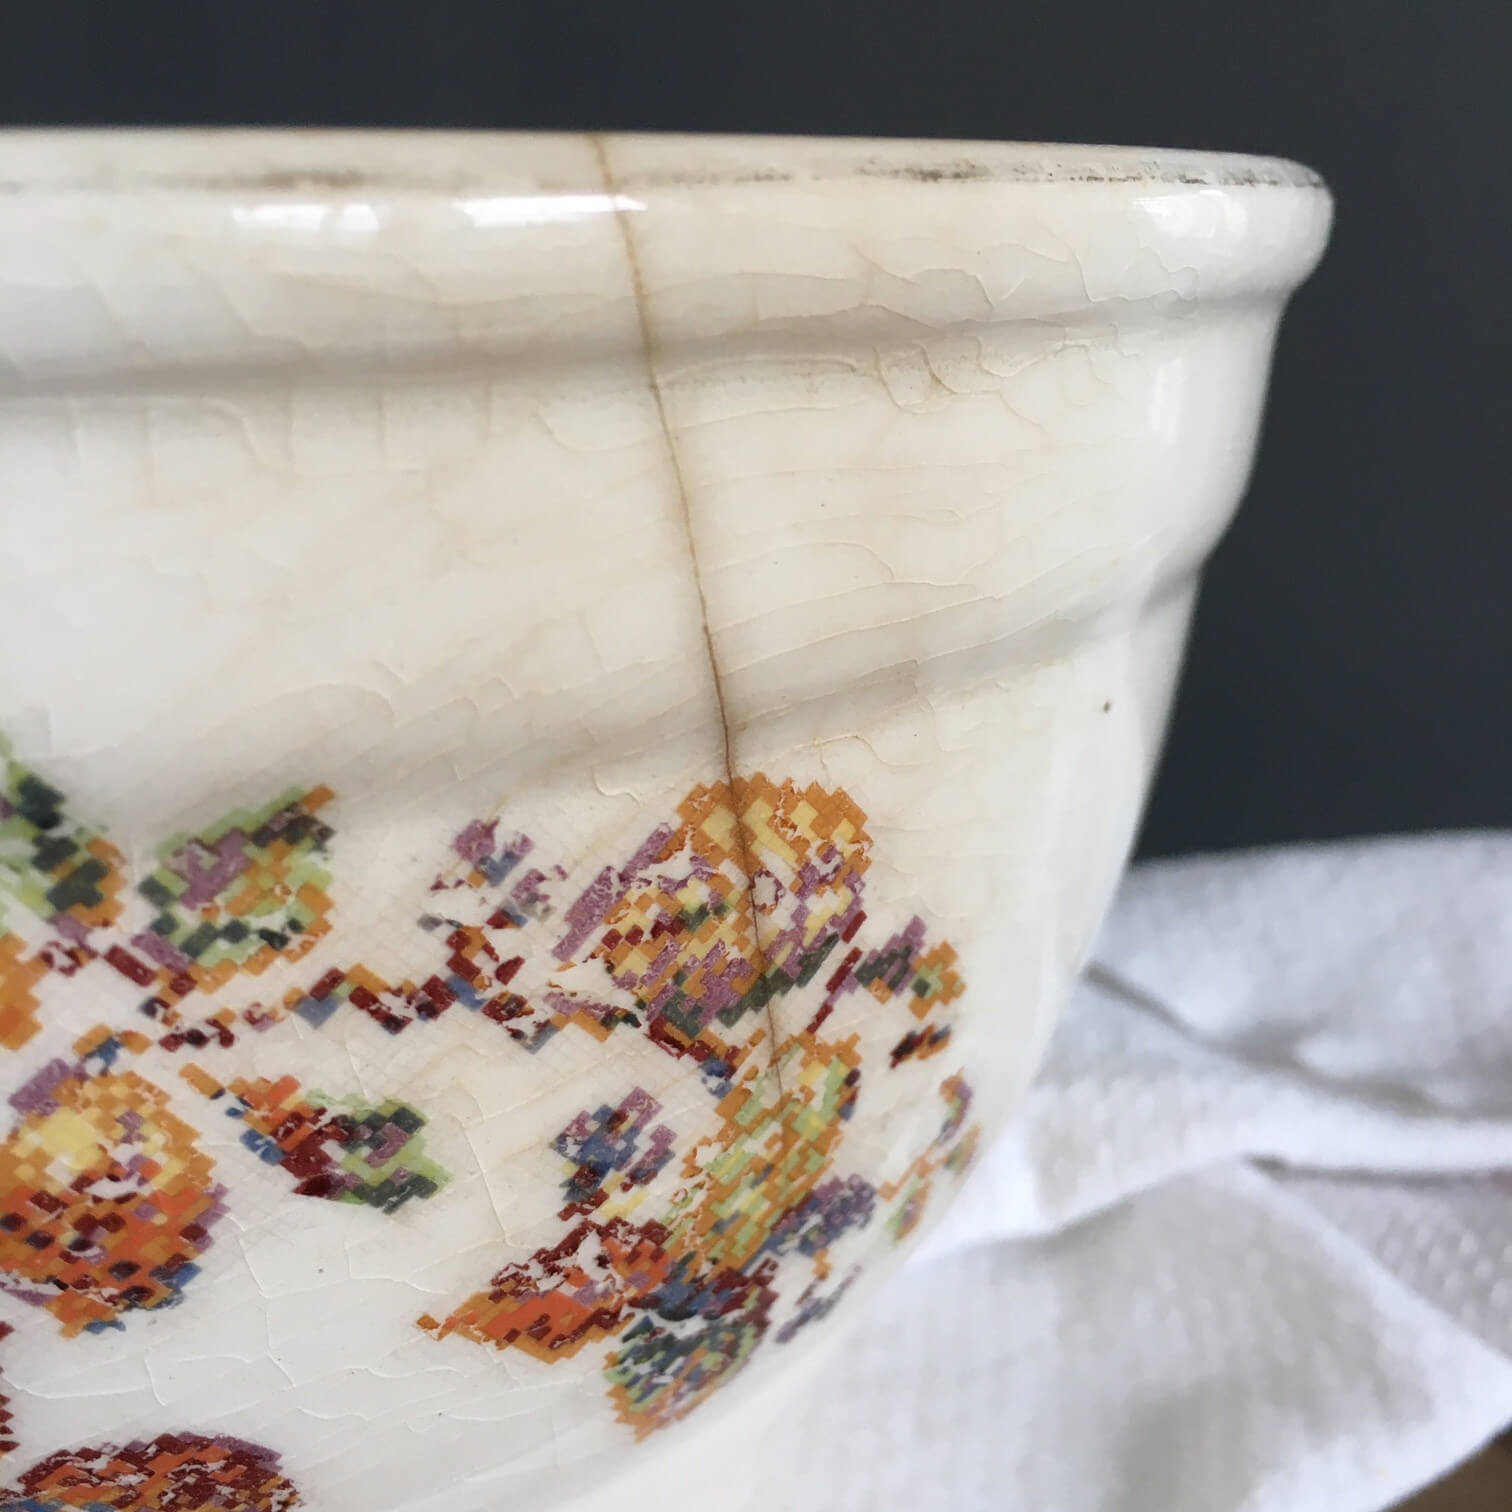 Vintage 1940's Mixing Bowl- Pantry Bak-In by Ware Crooksville - Rare Needlepoint Leaf Pattern